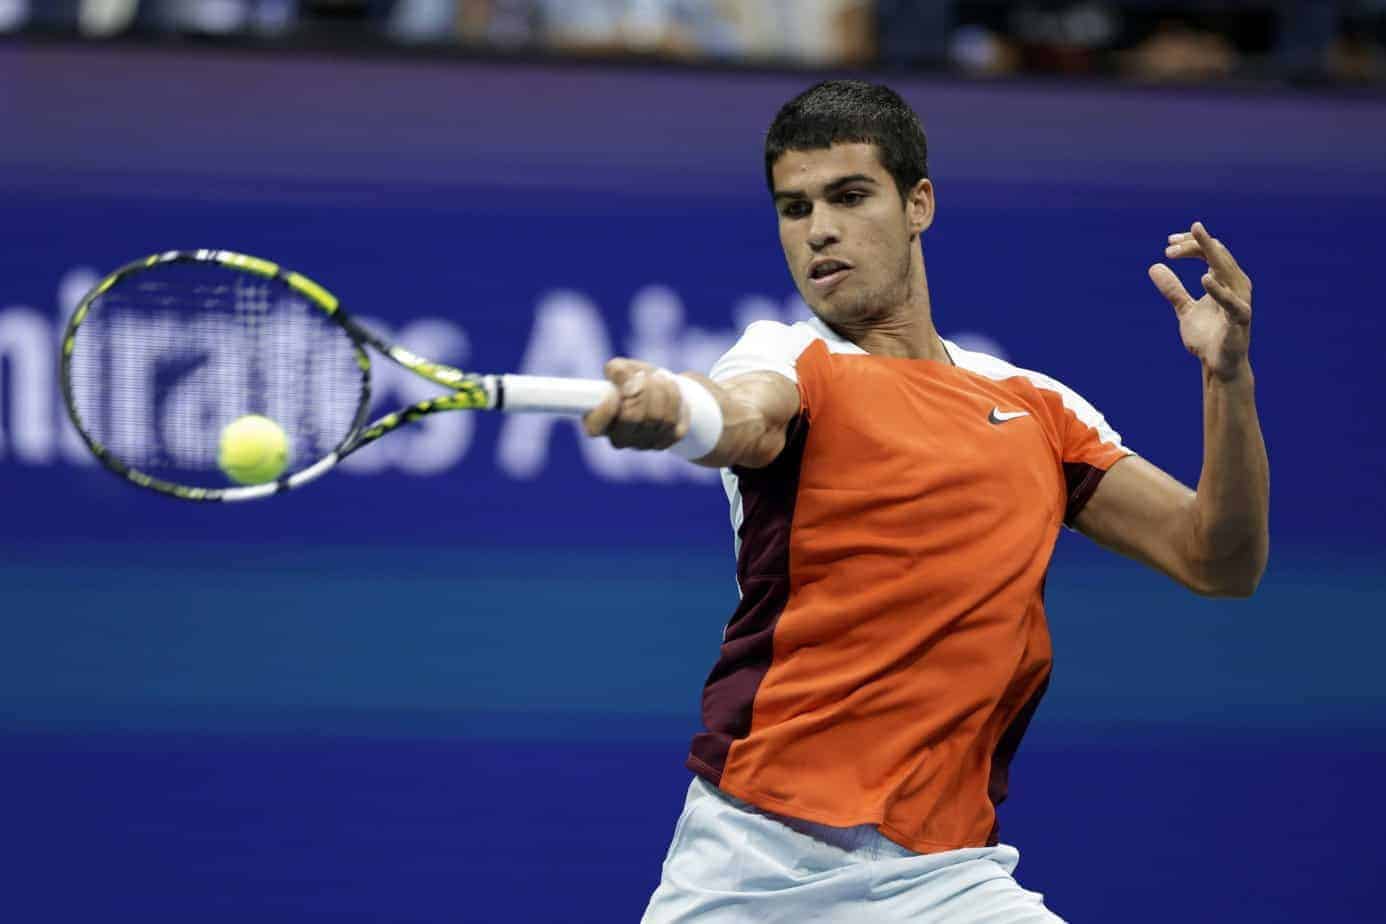 Let's dive into the Carlos Alcaraz-Jannik Sinner odds for the French Open semifinals, which will likely determine...